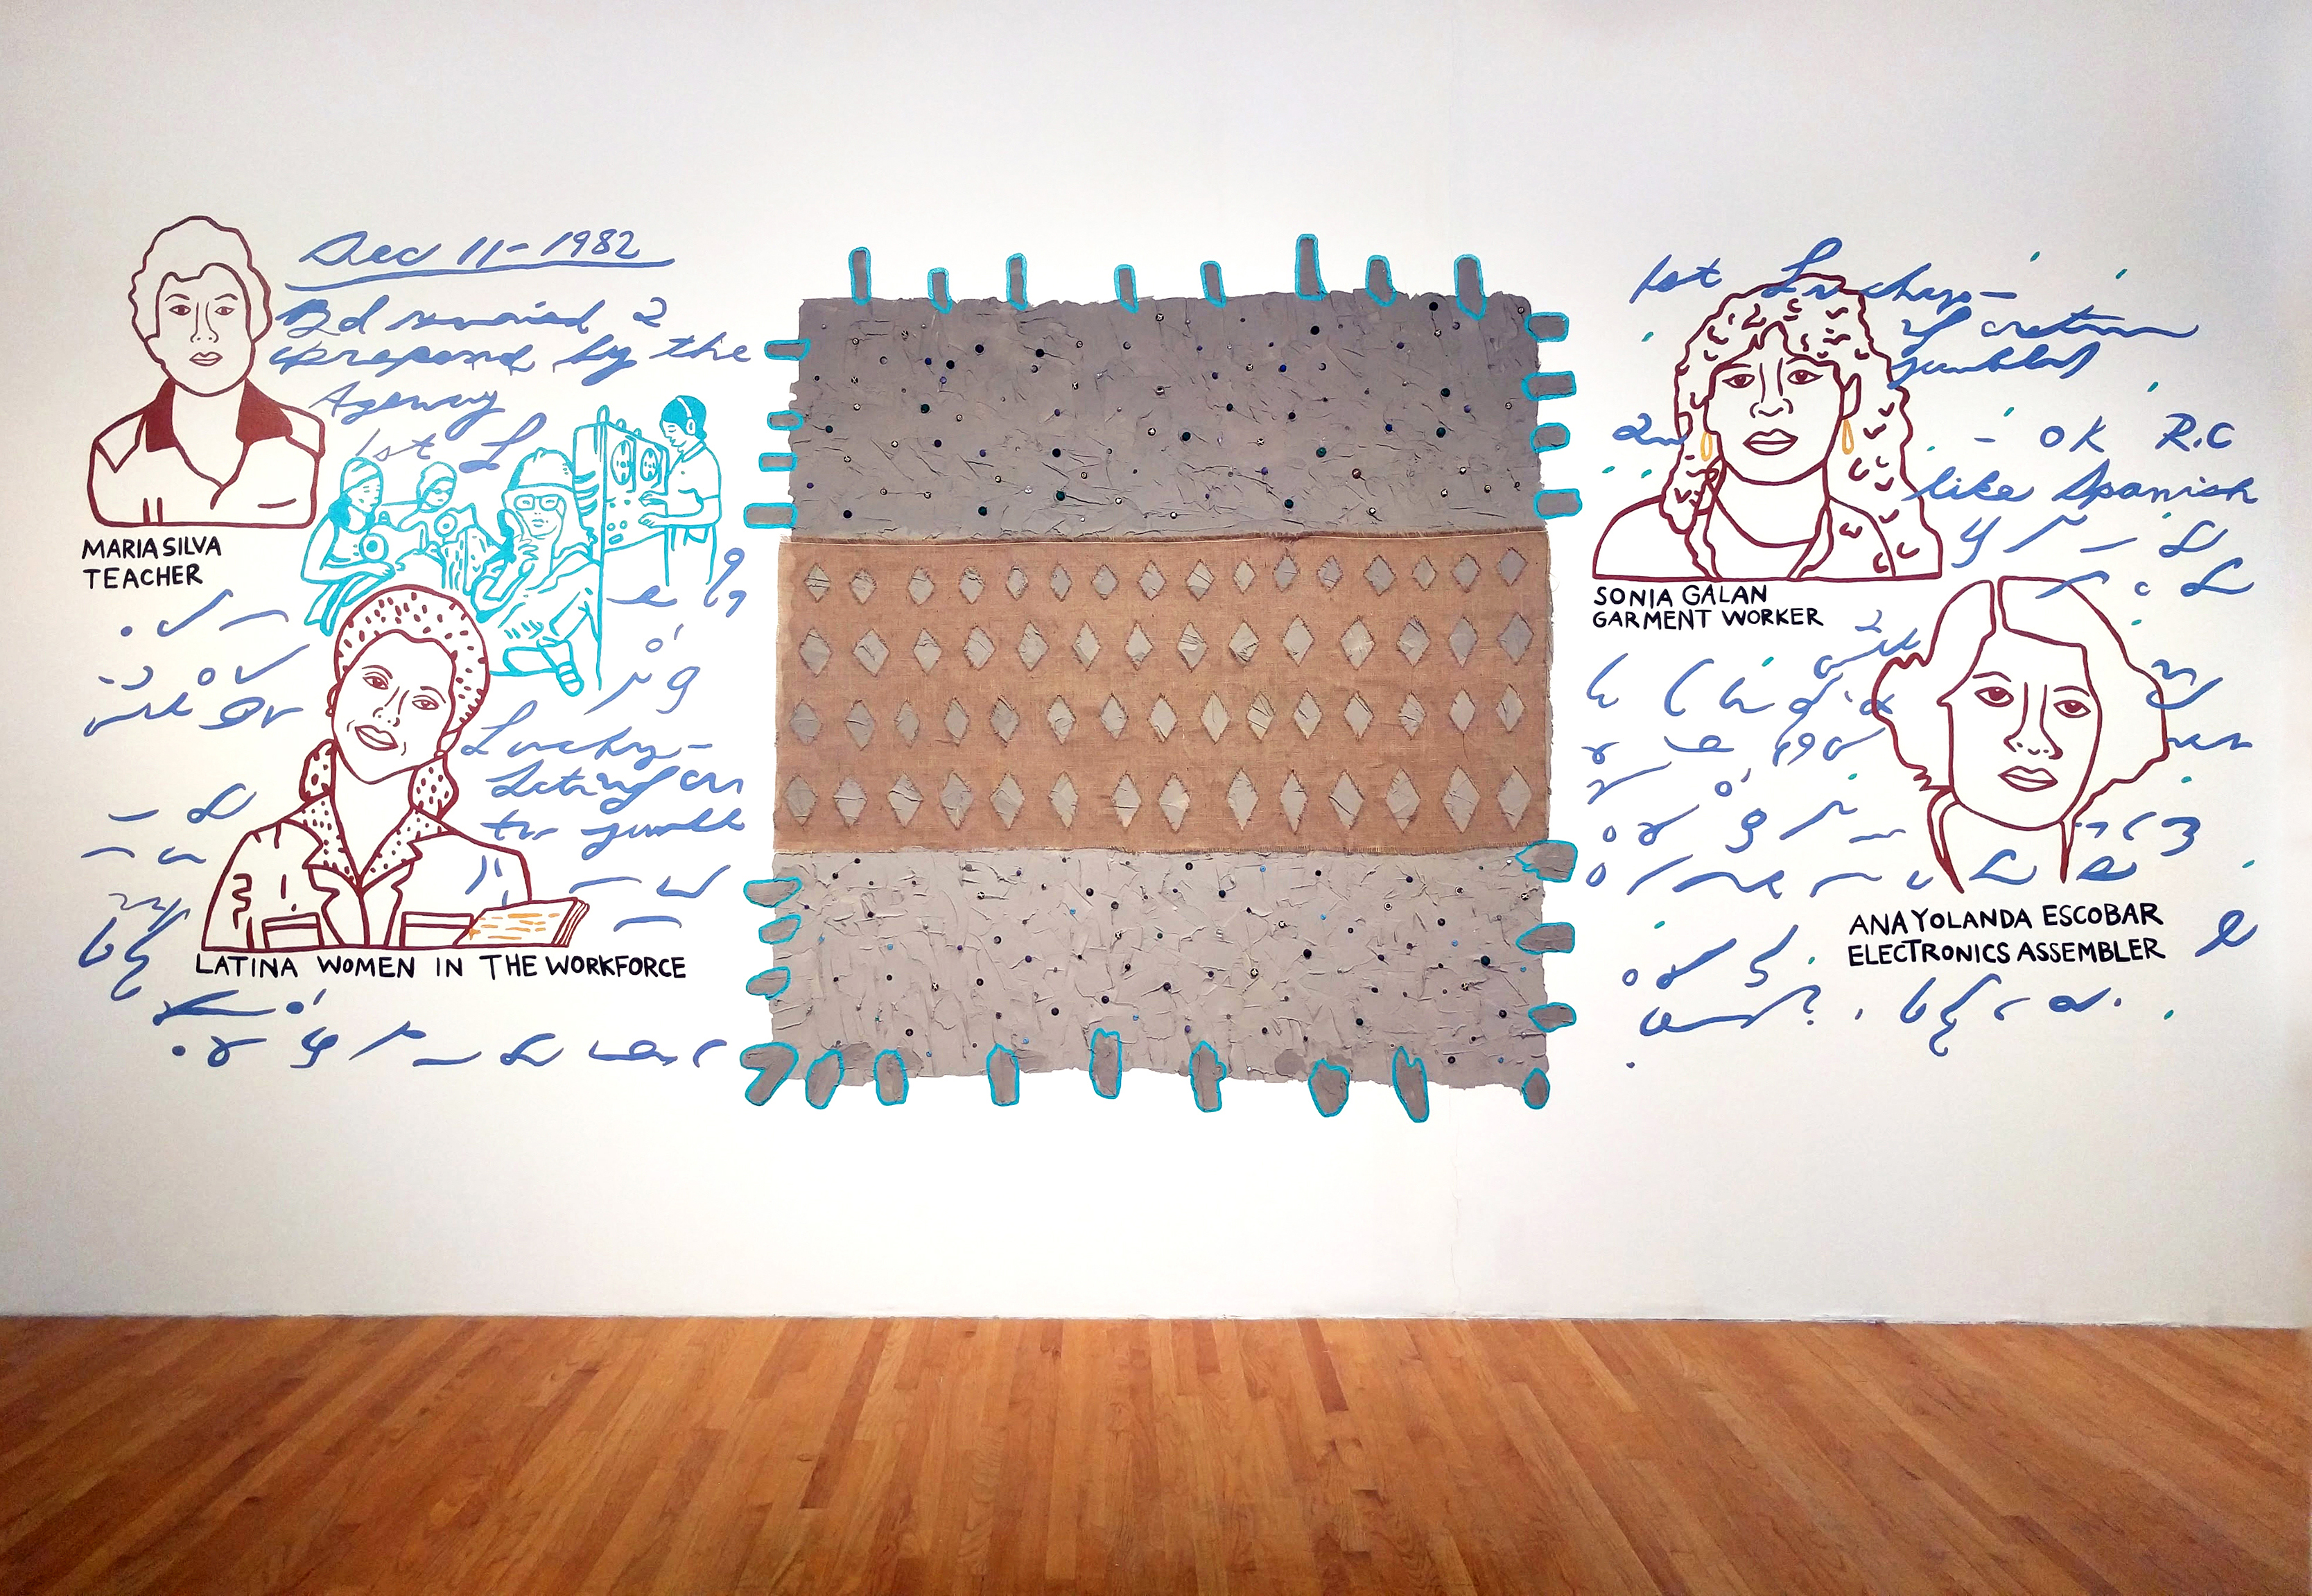 “Where is you spirit now?,” 2017. Installation responding to the United Farm Workers archives from Wayne State University in Glass Curtain Gallery at Columbia College Chicago. Graphic portraits of women workers are painted in a minimal line drawing style onto the wall. The images are surrounded by handwriting and marks painted in blue and surround a brown and gray rectangular textile alternating geometric patterns and colors in three parts.